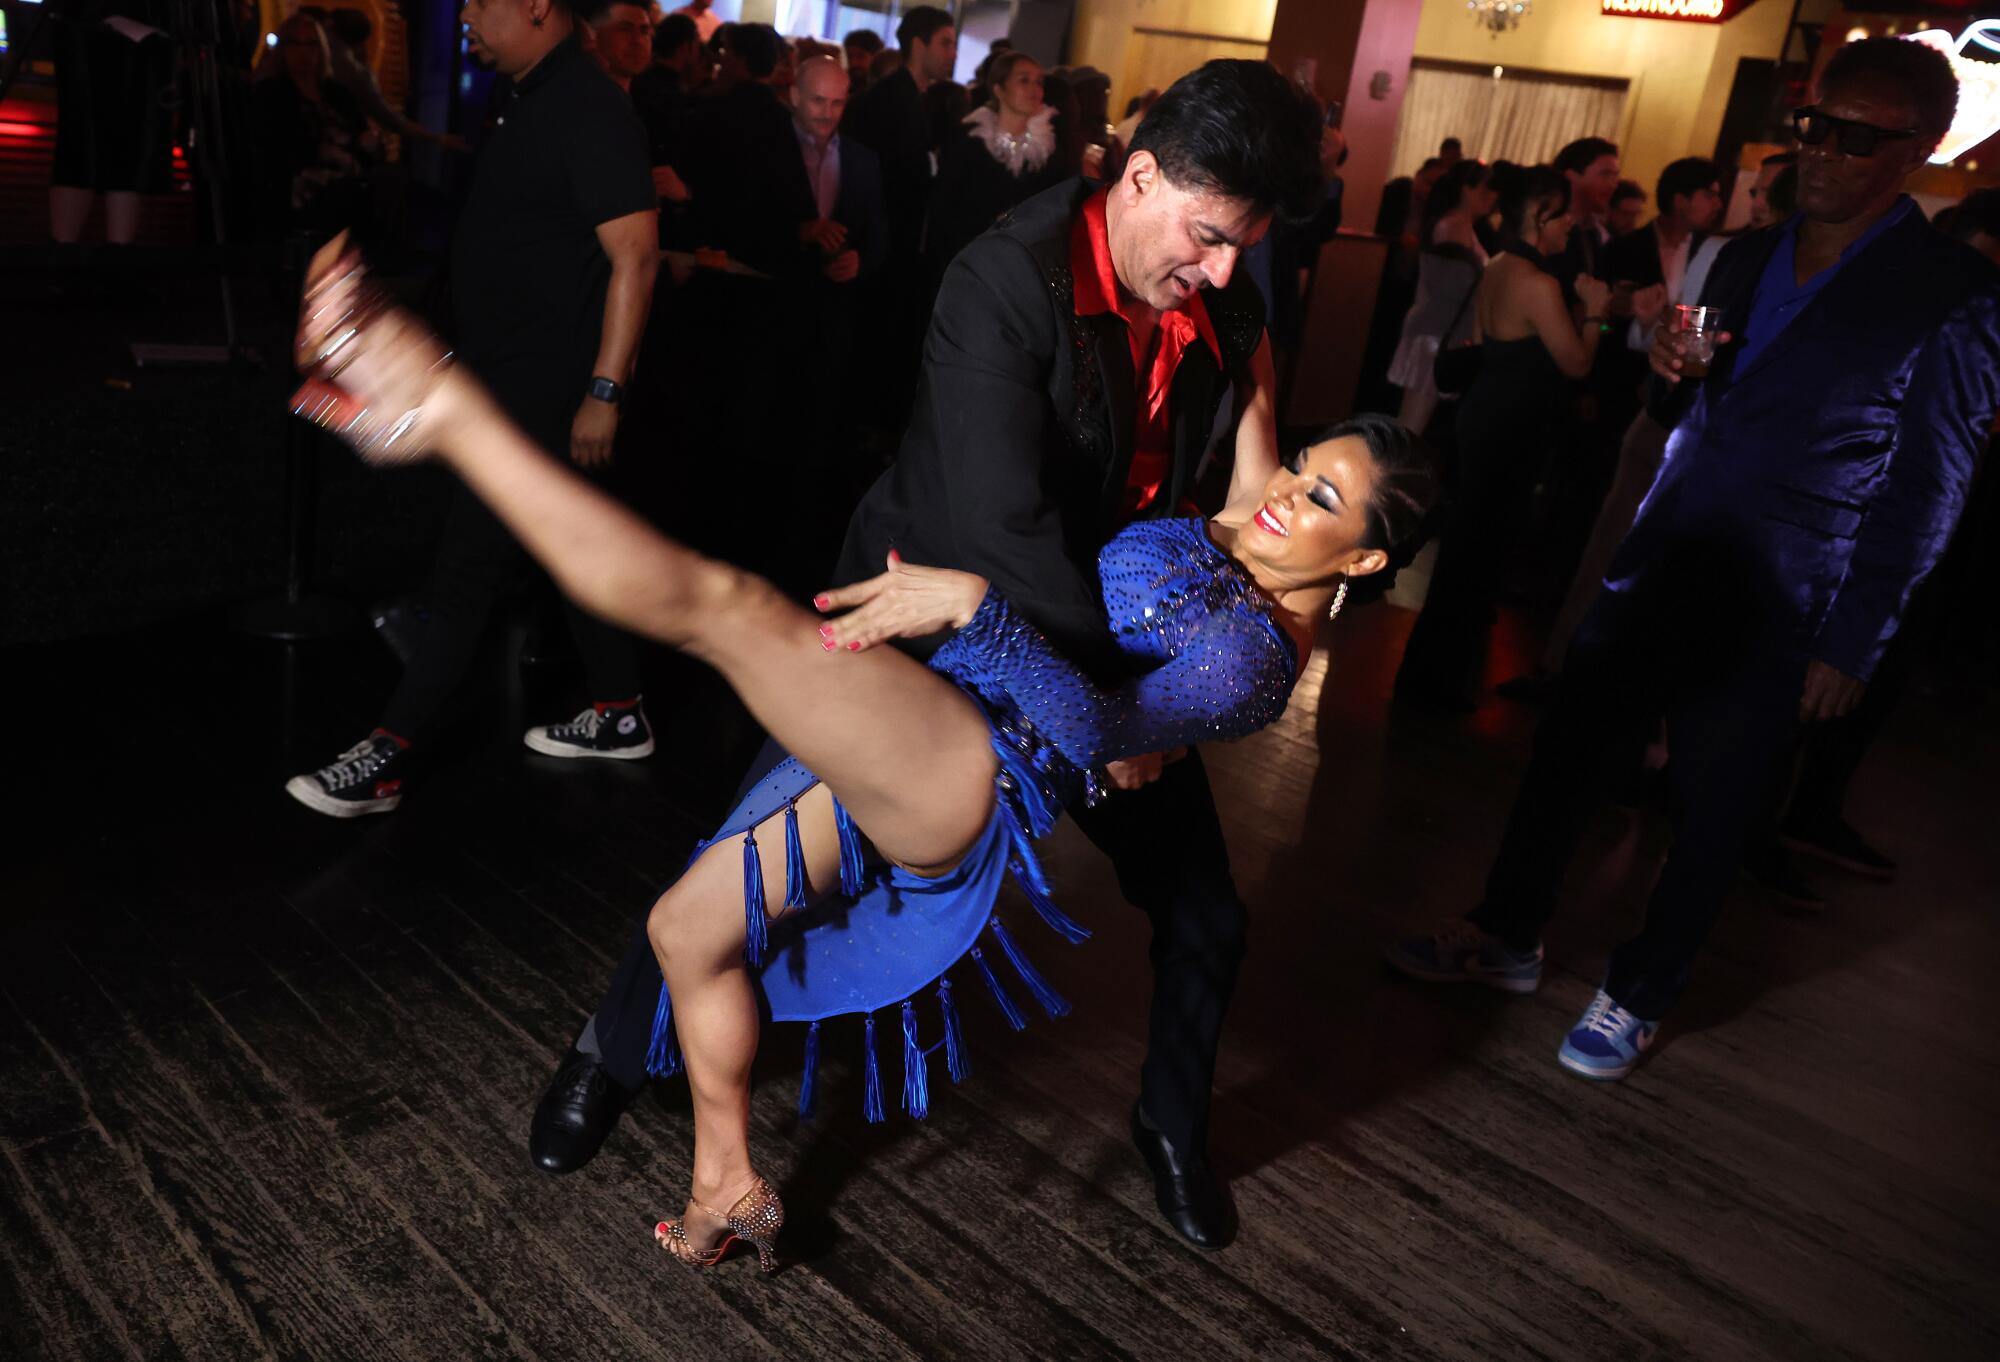 Dancers enjoy themselves at the Conga Room during a farewell show after 25 years in business.